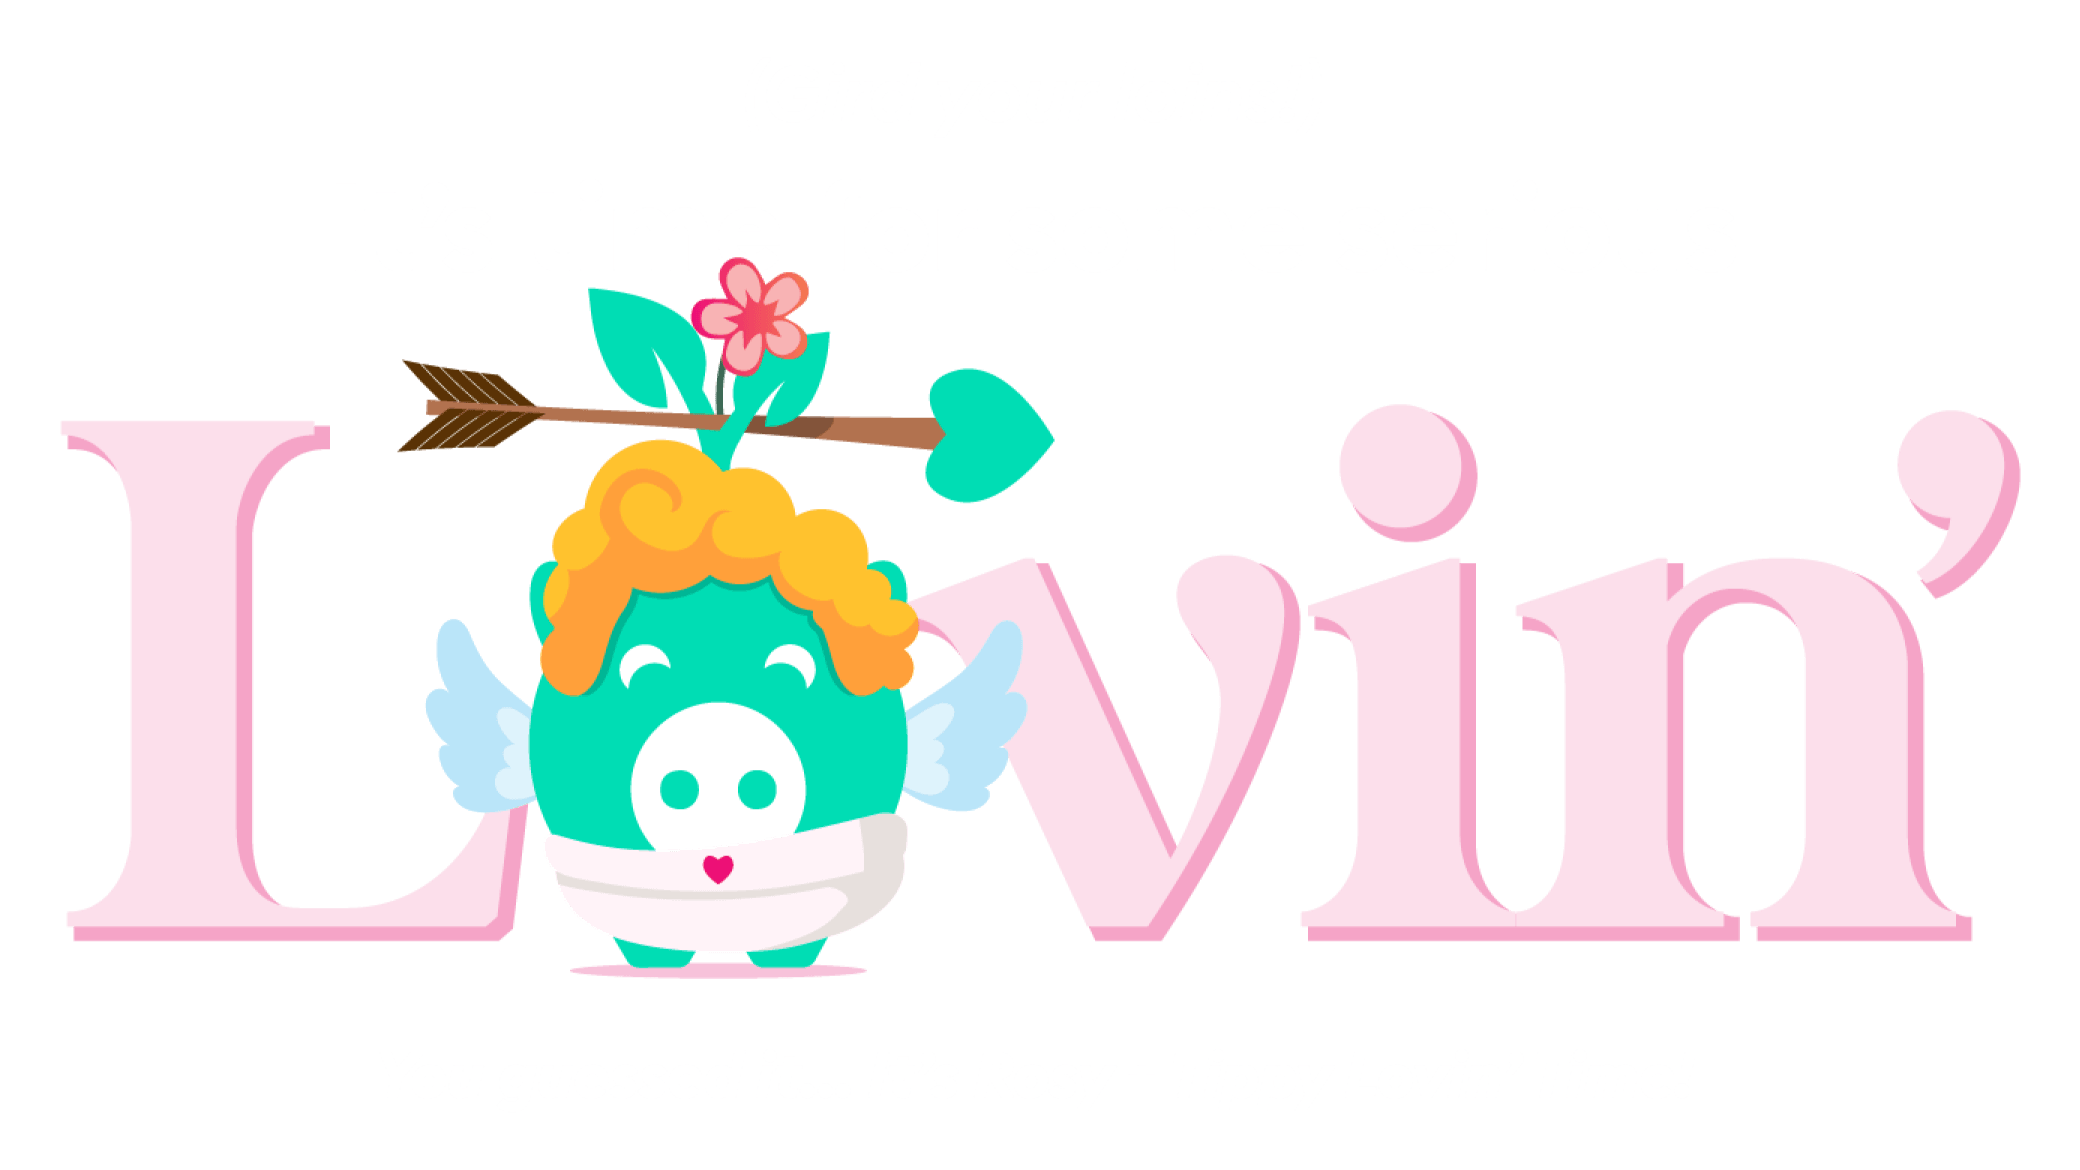 (Gird your loins!) It's time for some serious Loving' You guessed it... It's Rosy + Tippy Lovin' time!